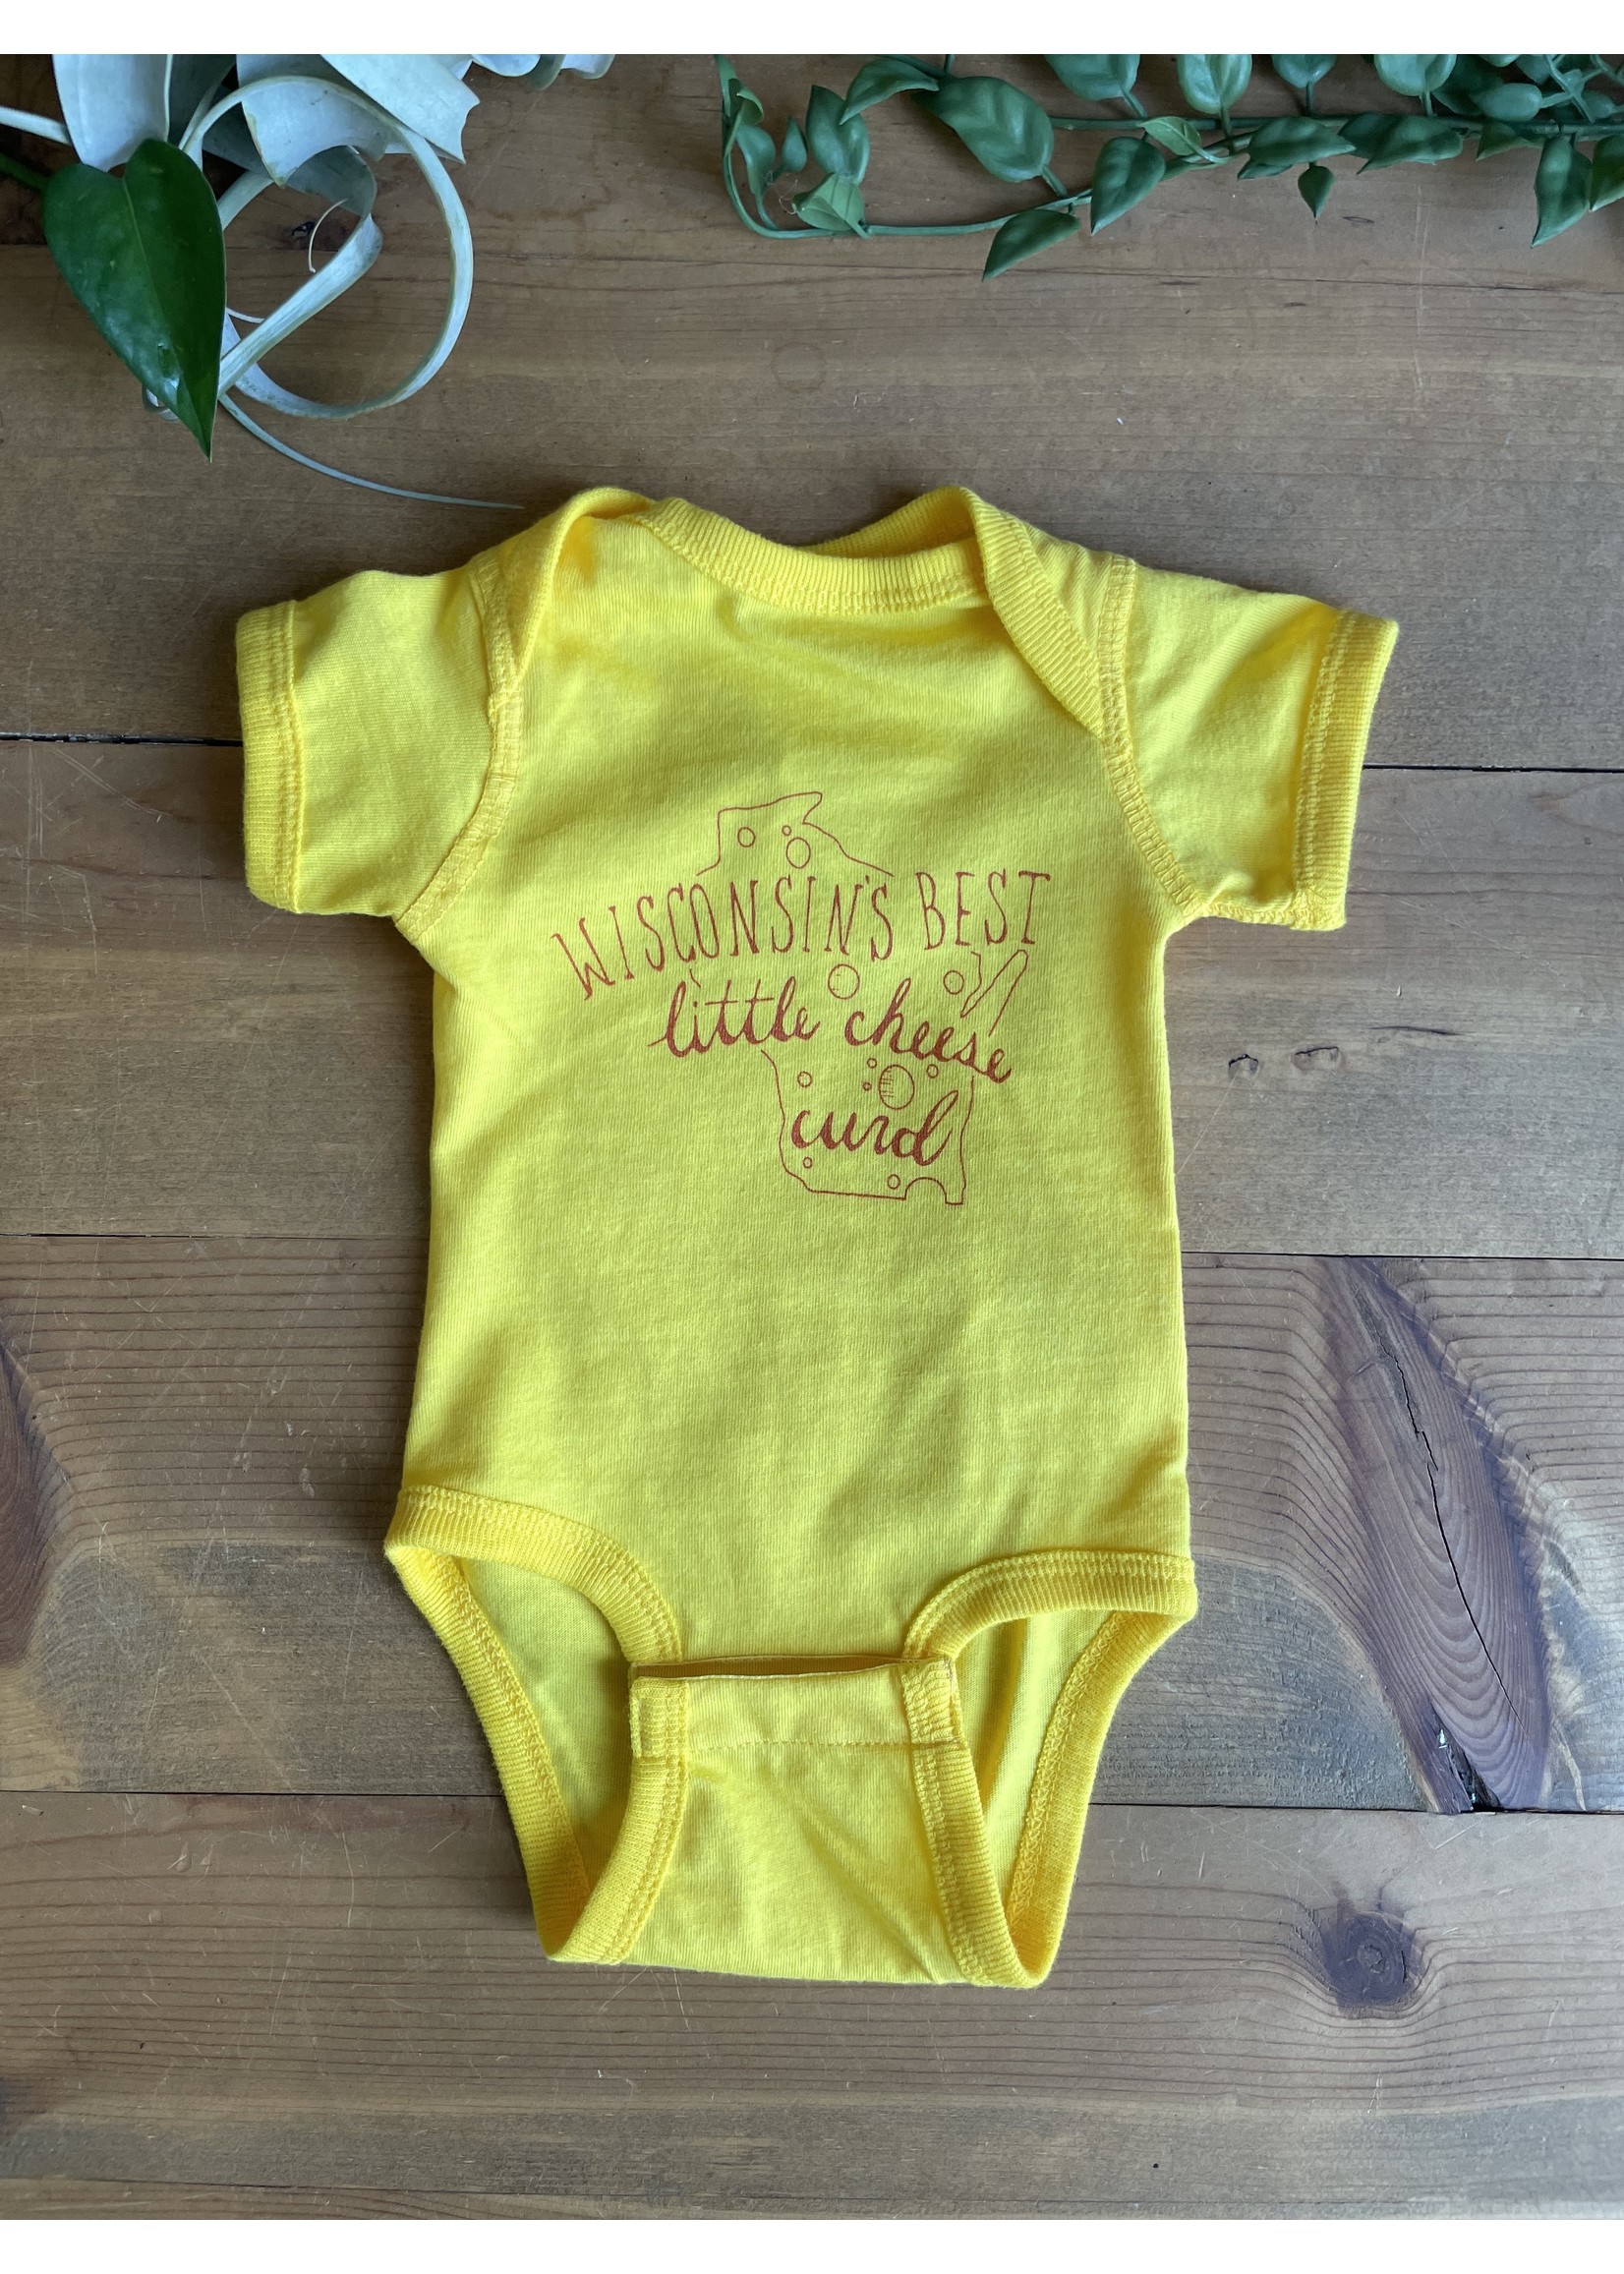 Tangled Up In Hue Wholesale Wisconsin's Best Little Cheesecurd Baby Bodysuit